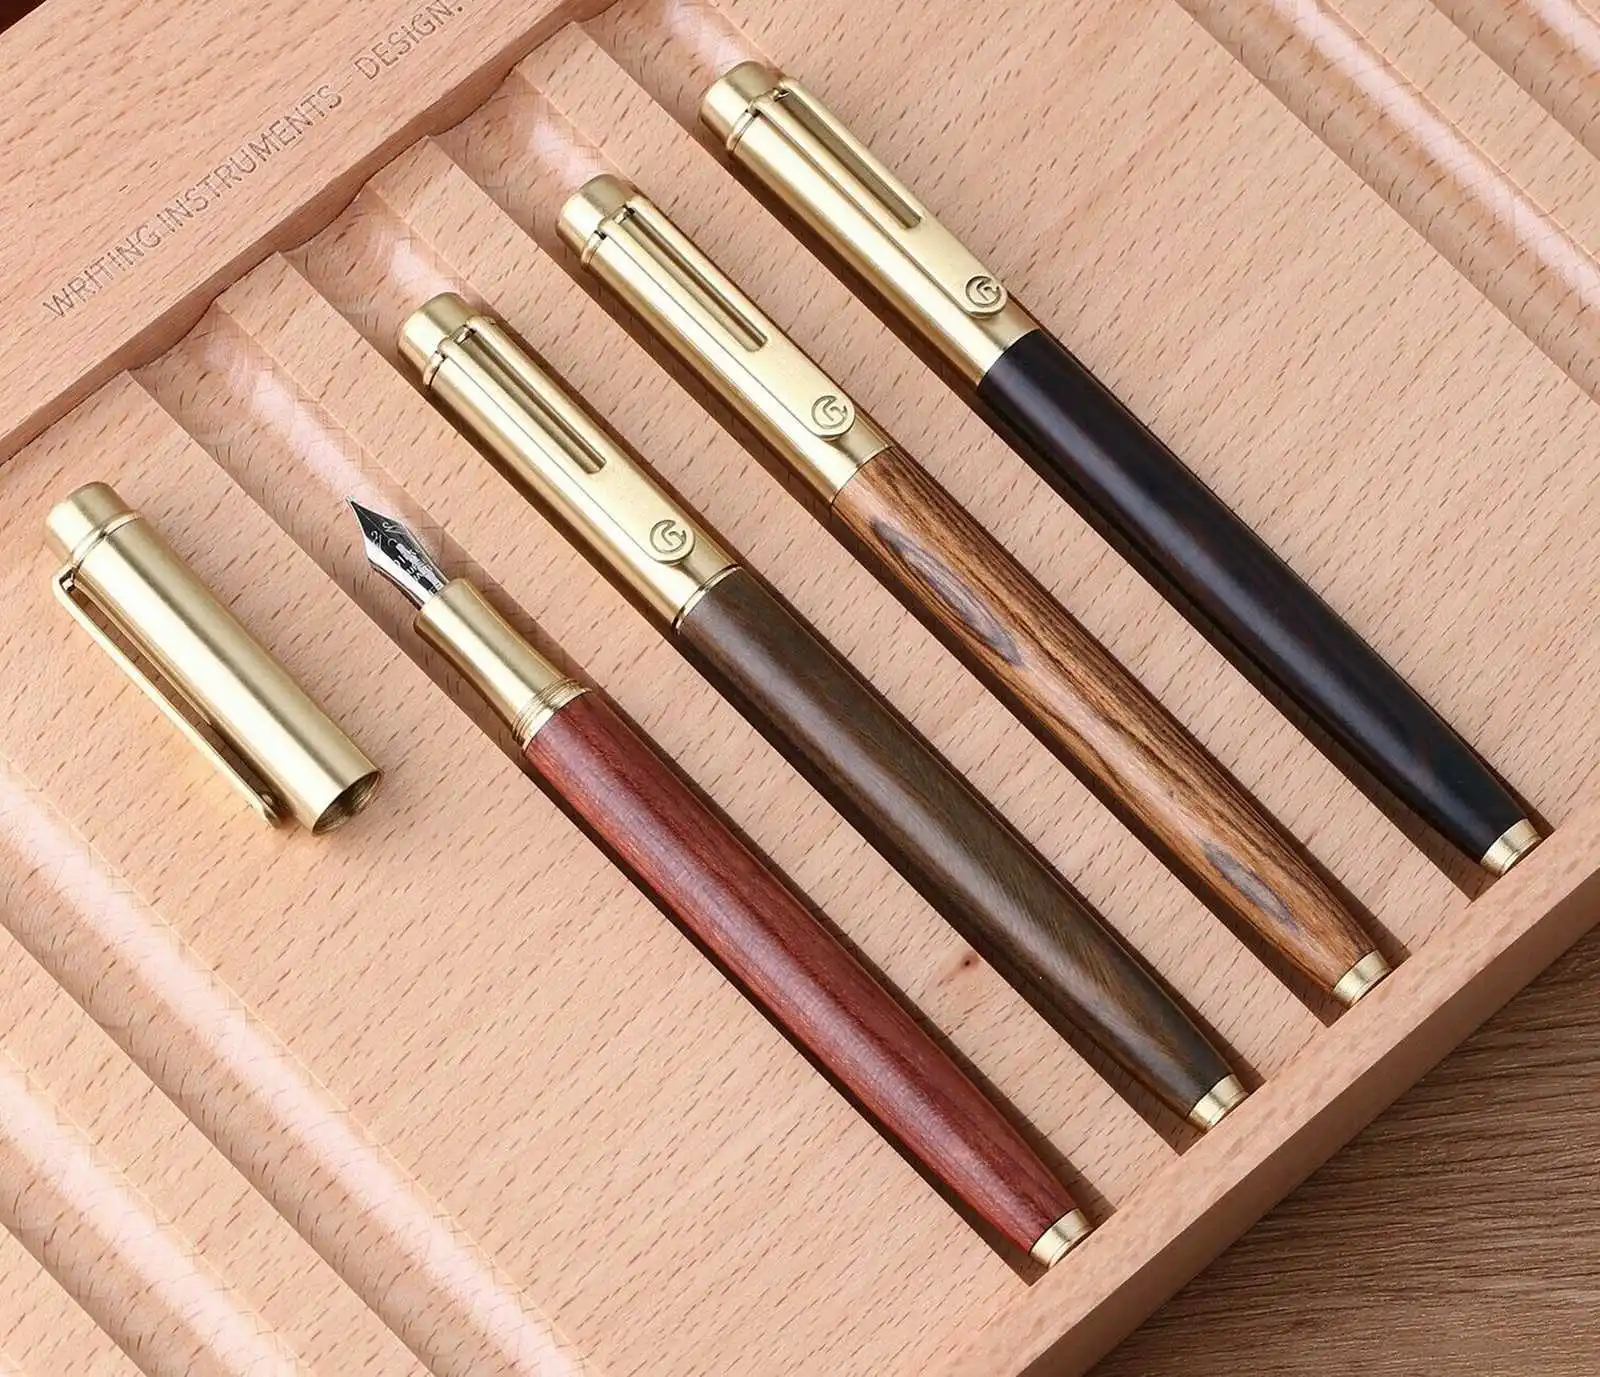 

New Majohn M7 Natural Wood Fountain Pen Iridium EF/ F/ Bent Nib Smooth Writing Pen with box gift for student office school pens